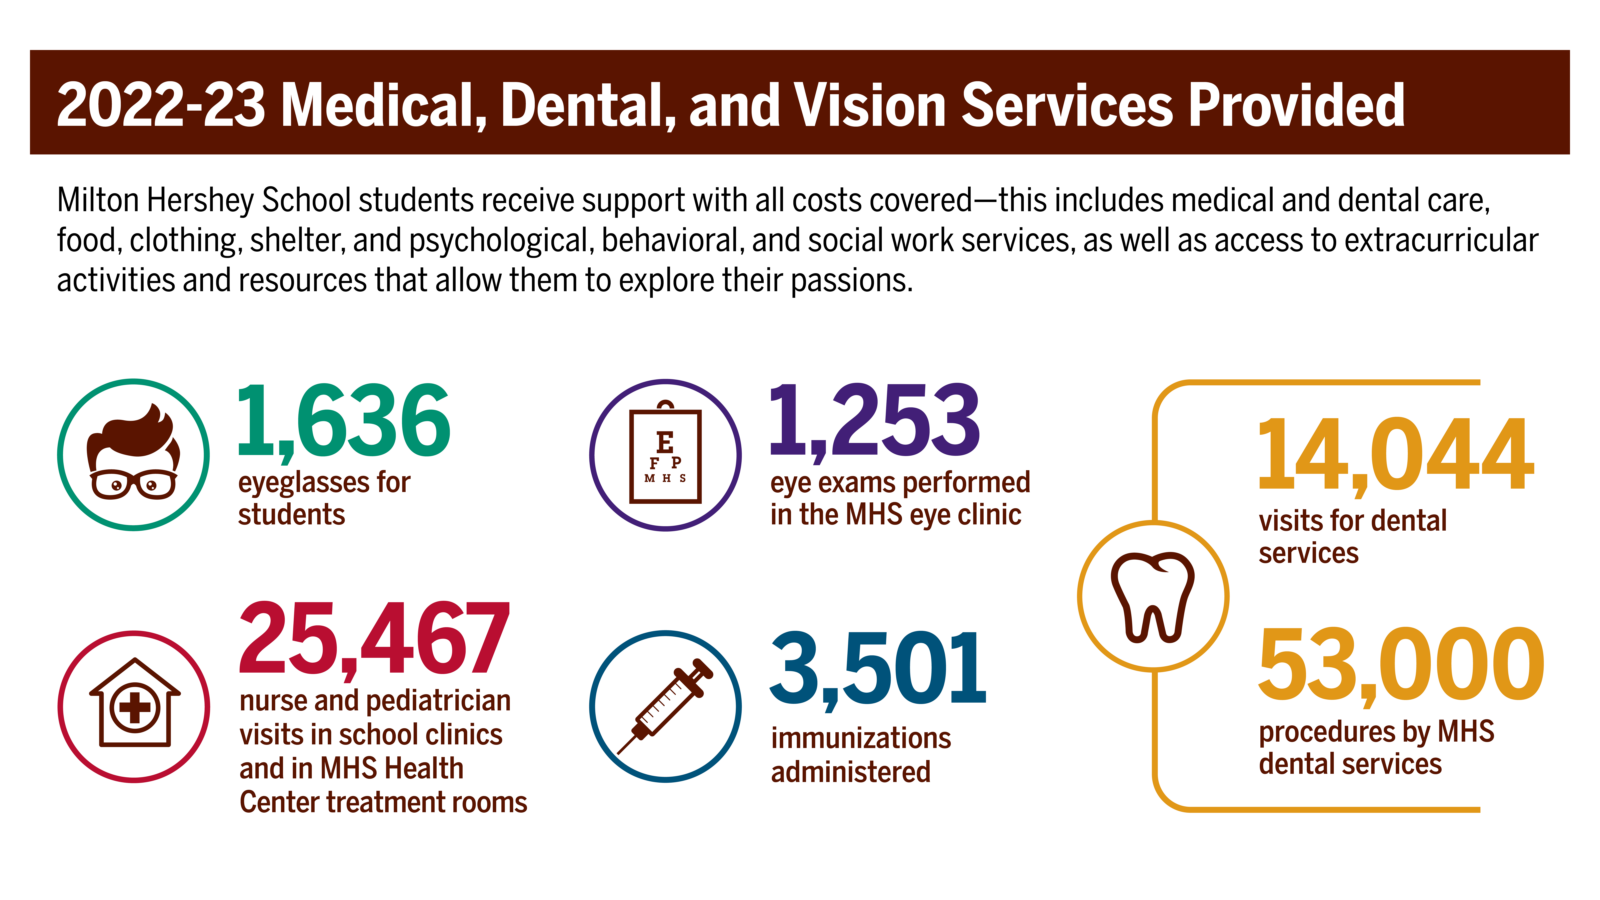 Milton Hershey School provides for the whole child with medical, dental, and psychological services with all costs covered.